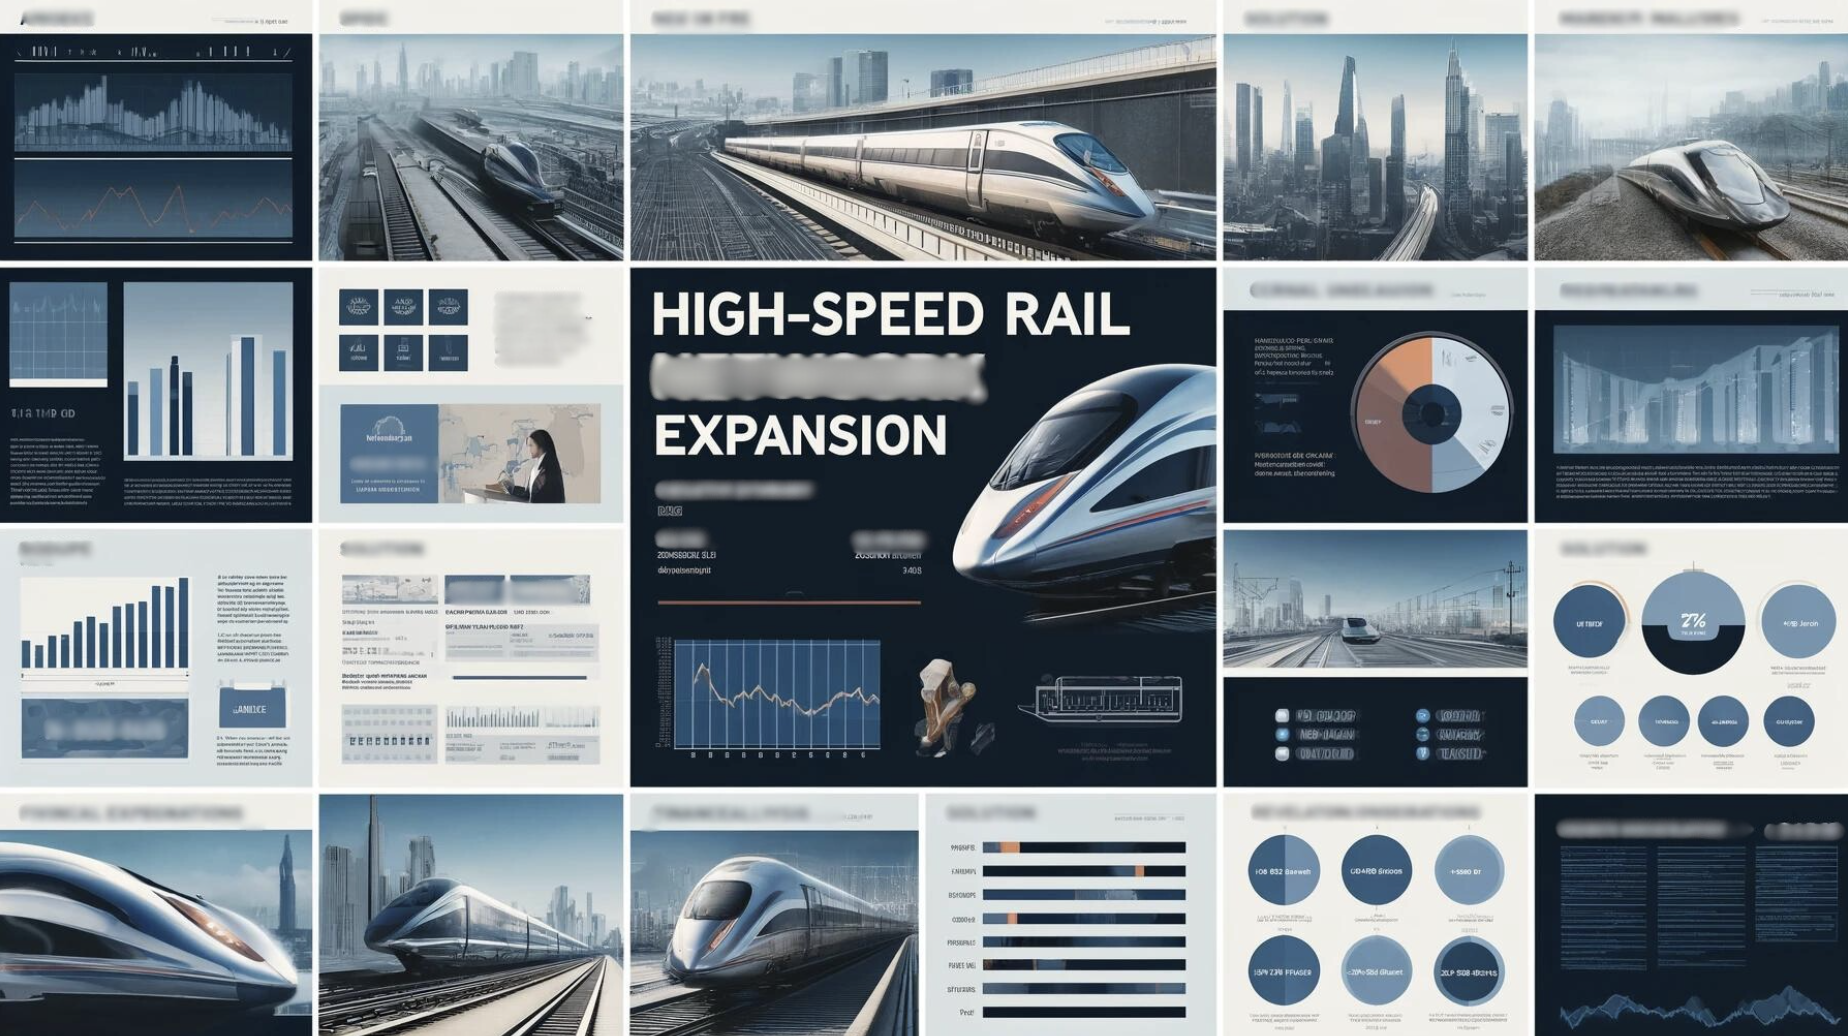 High-Speed Rail Network Expansion pitch deck slides example